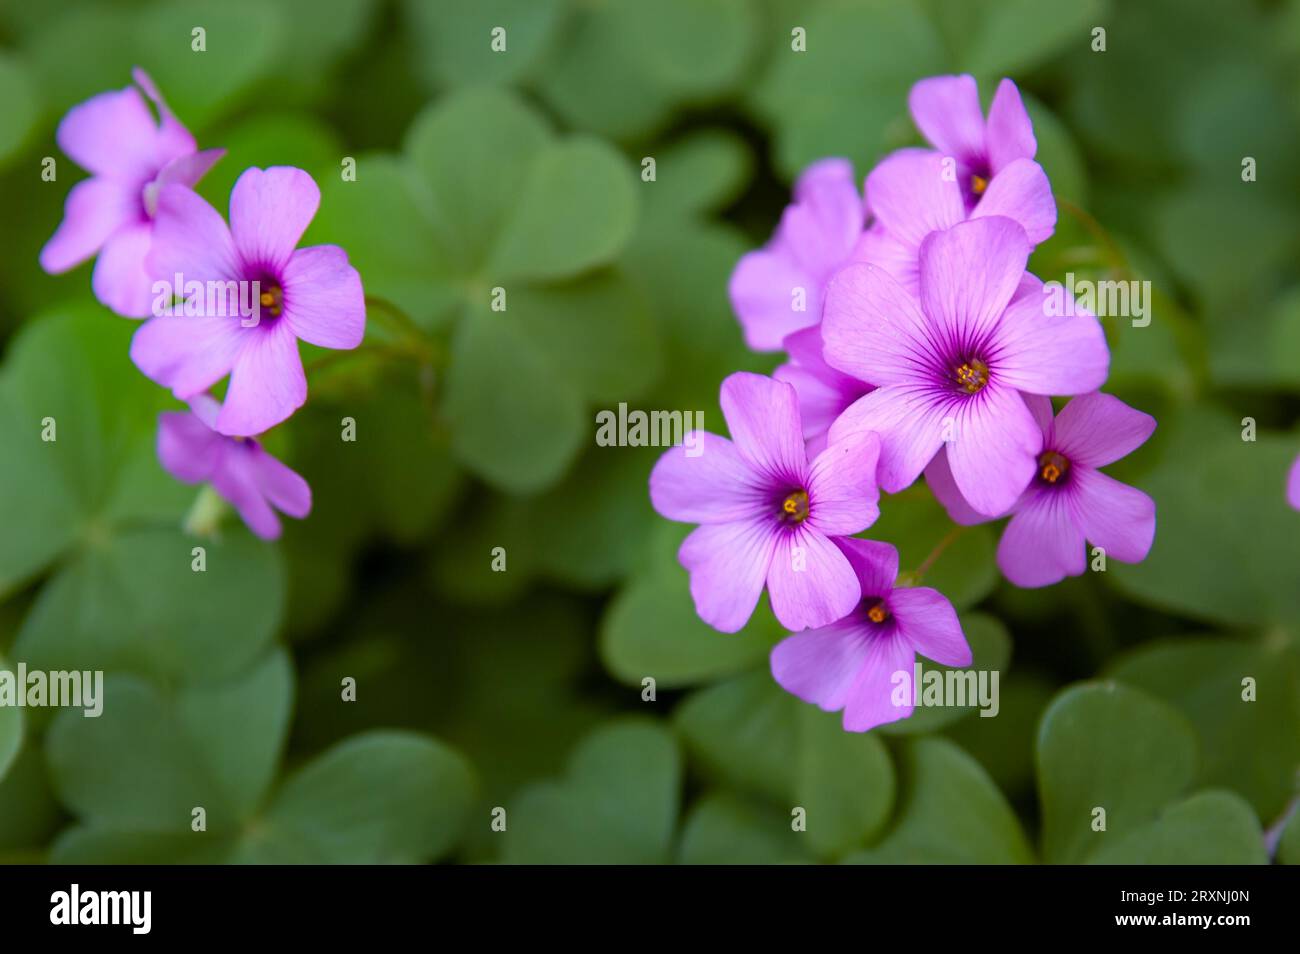 Pink (Erodium ciconium) flower, also known as Heron's bill, Storksbills or Filarees, on green leaves background Stock Photo